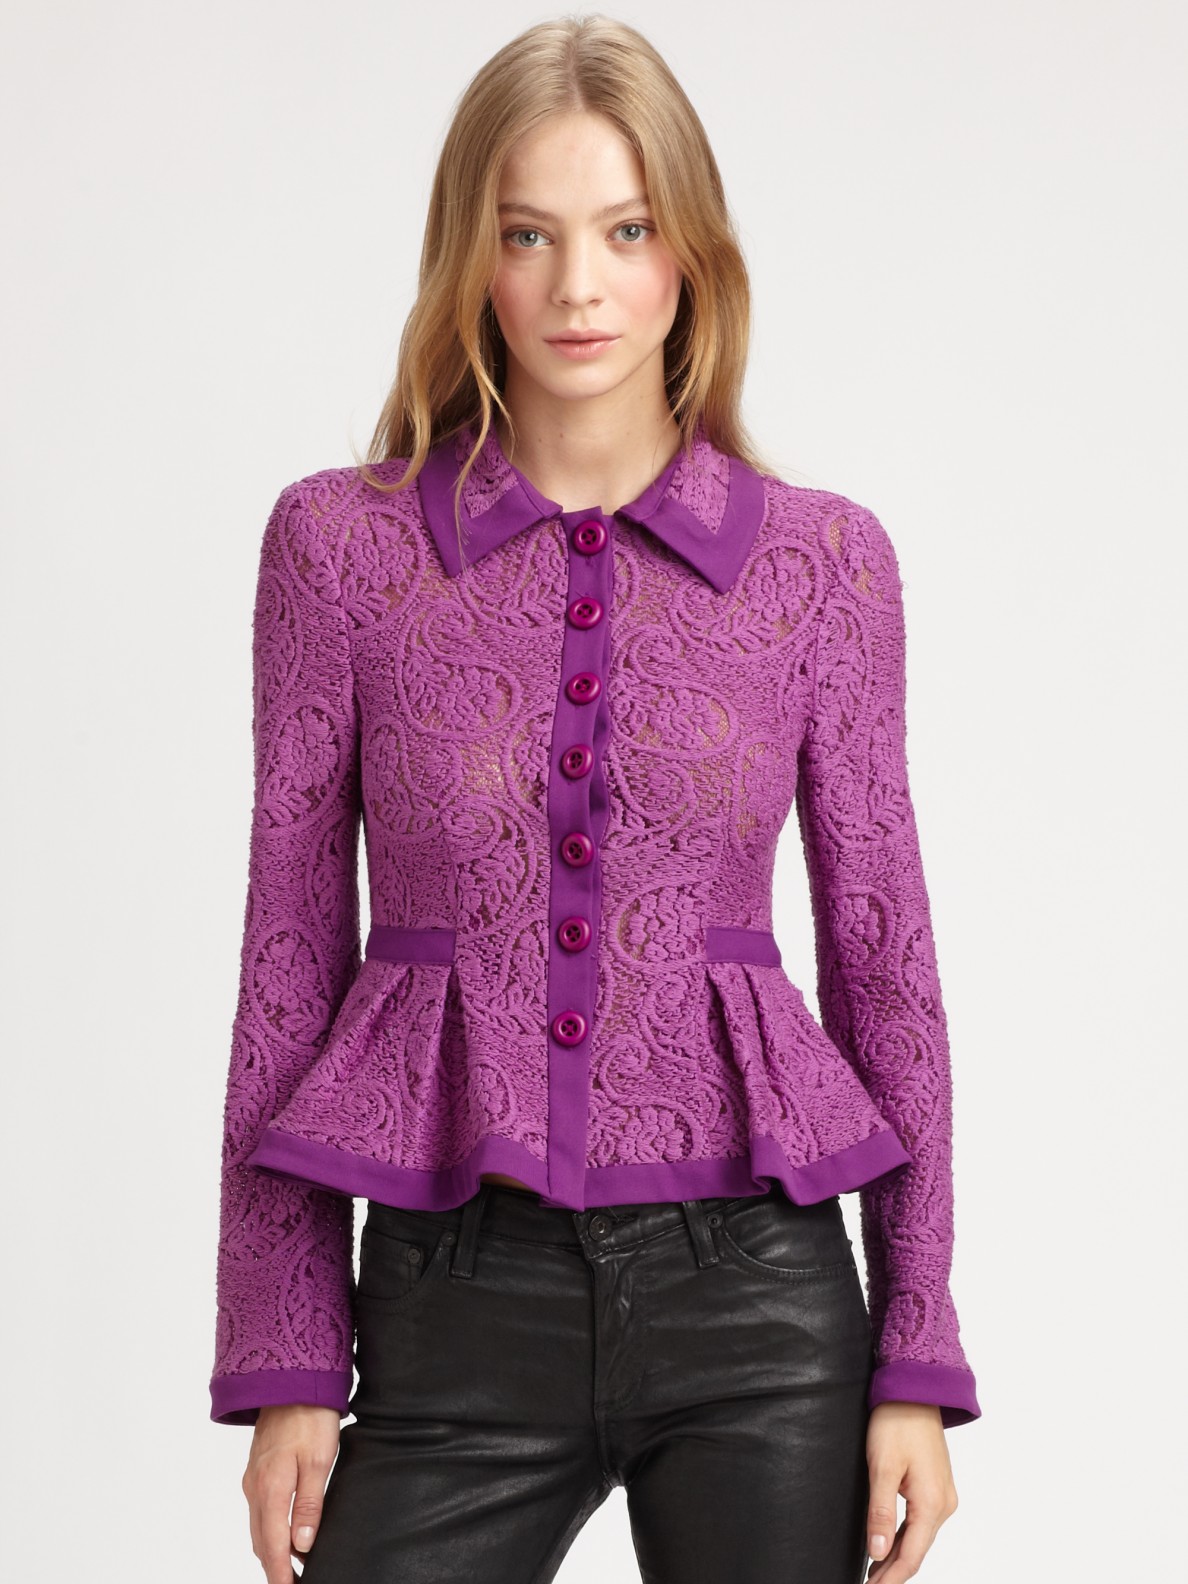 Lyst - Nanette Lepore Summer Flame Lace Peplum Jacket in Purple